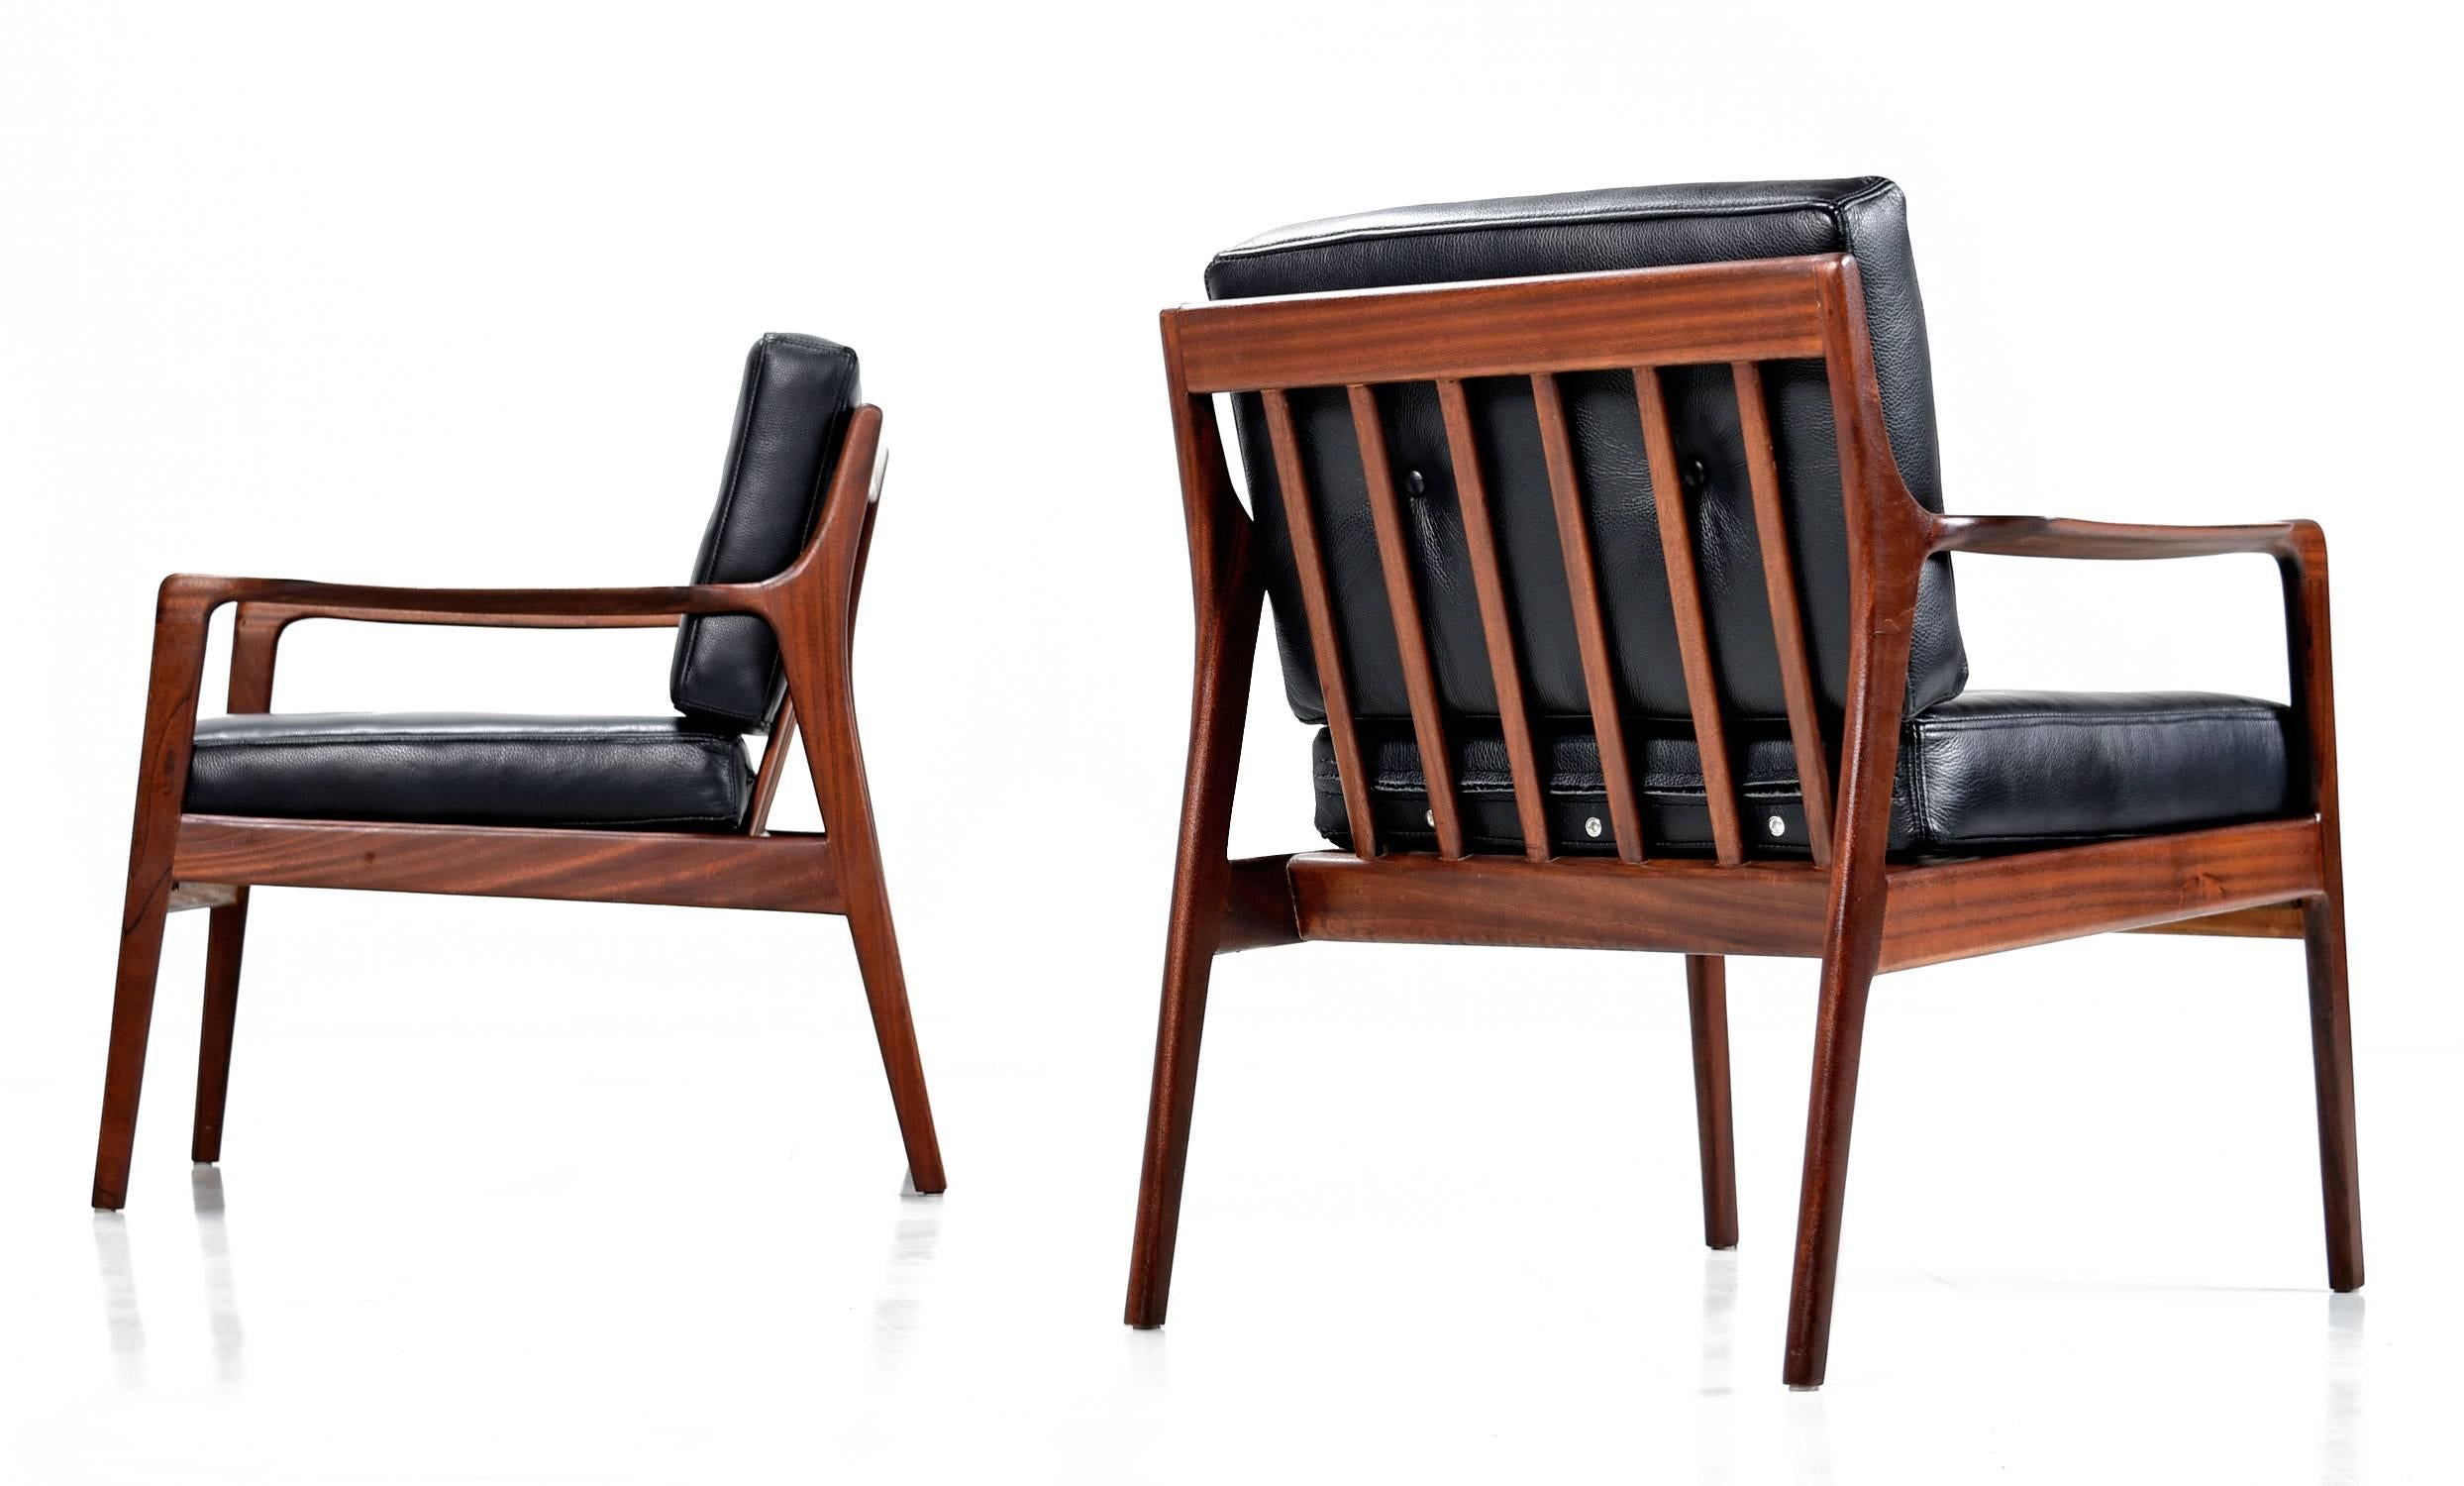 Pair of Danish Mid-Century Modern armchairs restored with new full grain leather upholstery. The early chairs, vintage 1950s, are made of mahogany rather than teak wood, an rarity for Scandinavian furniture. The chairs feature new webbing supports,